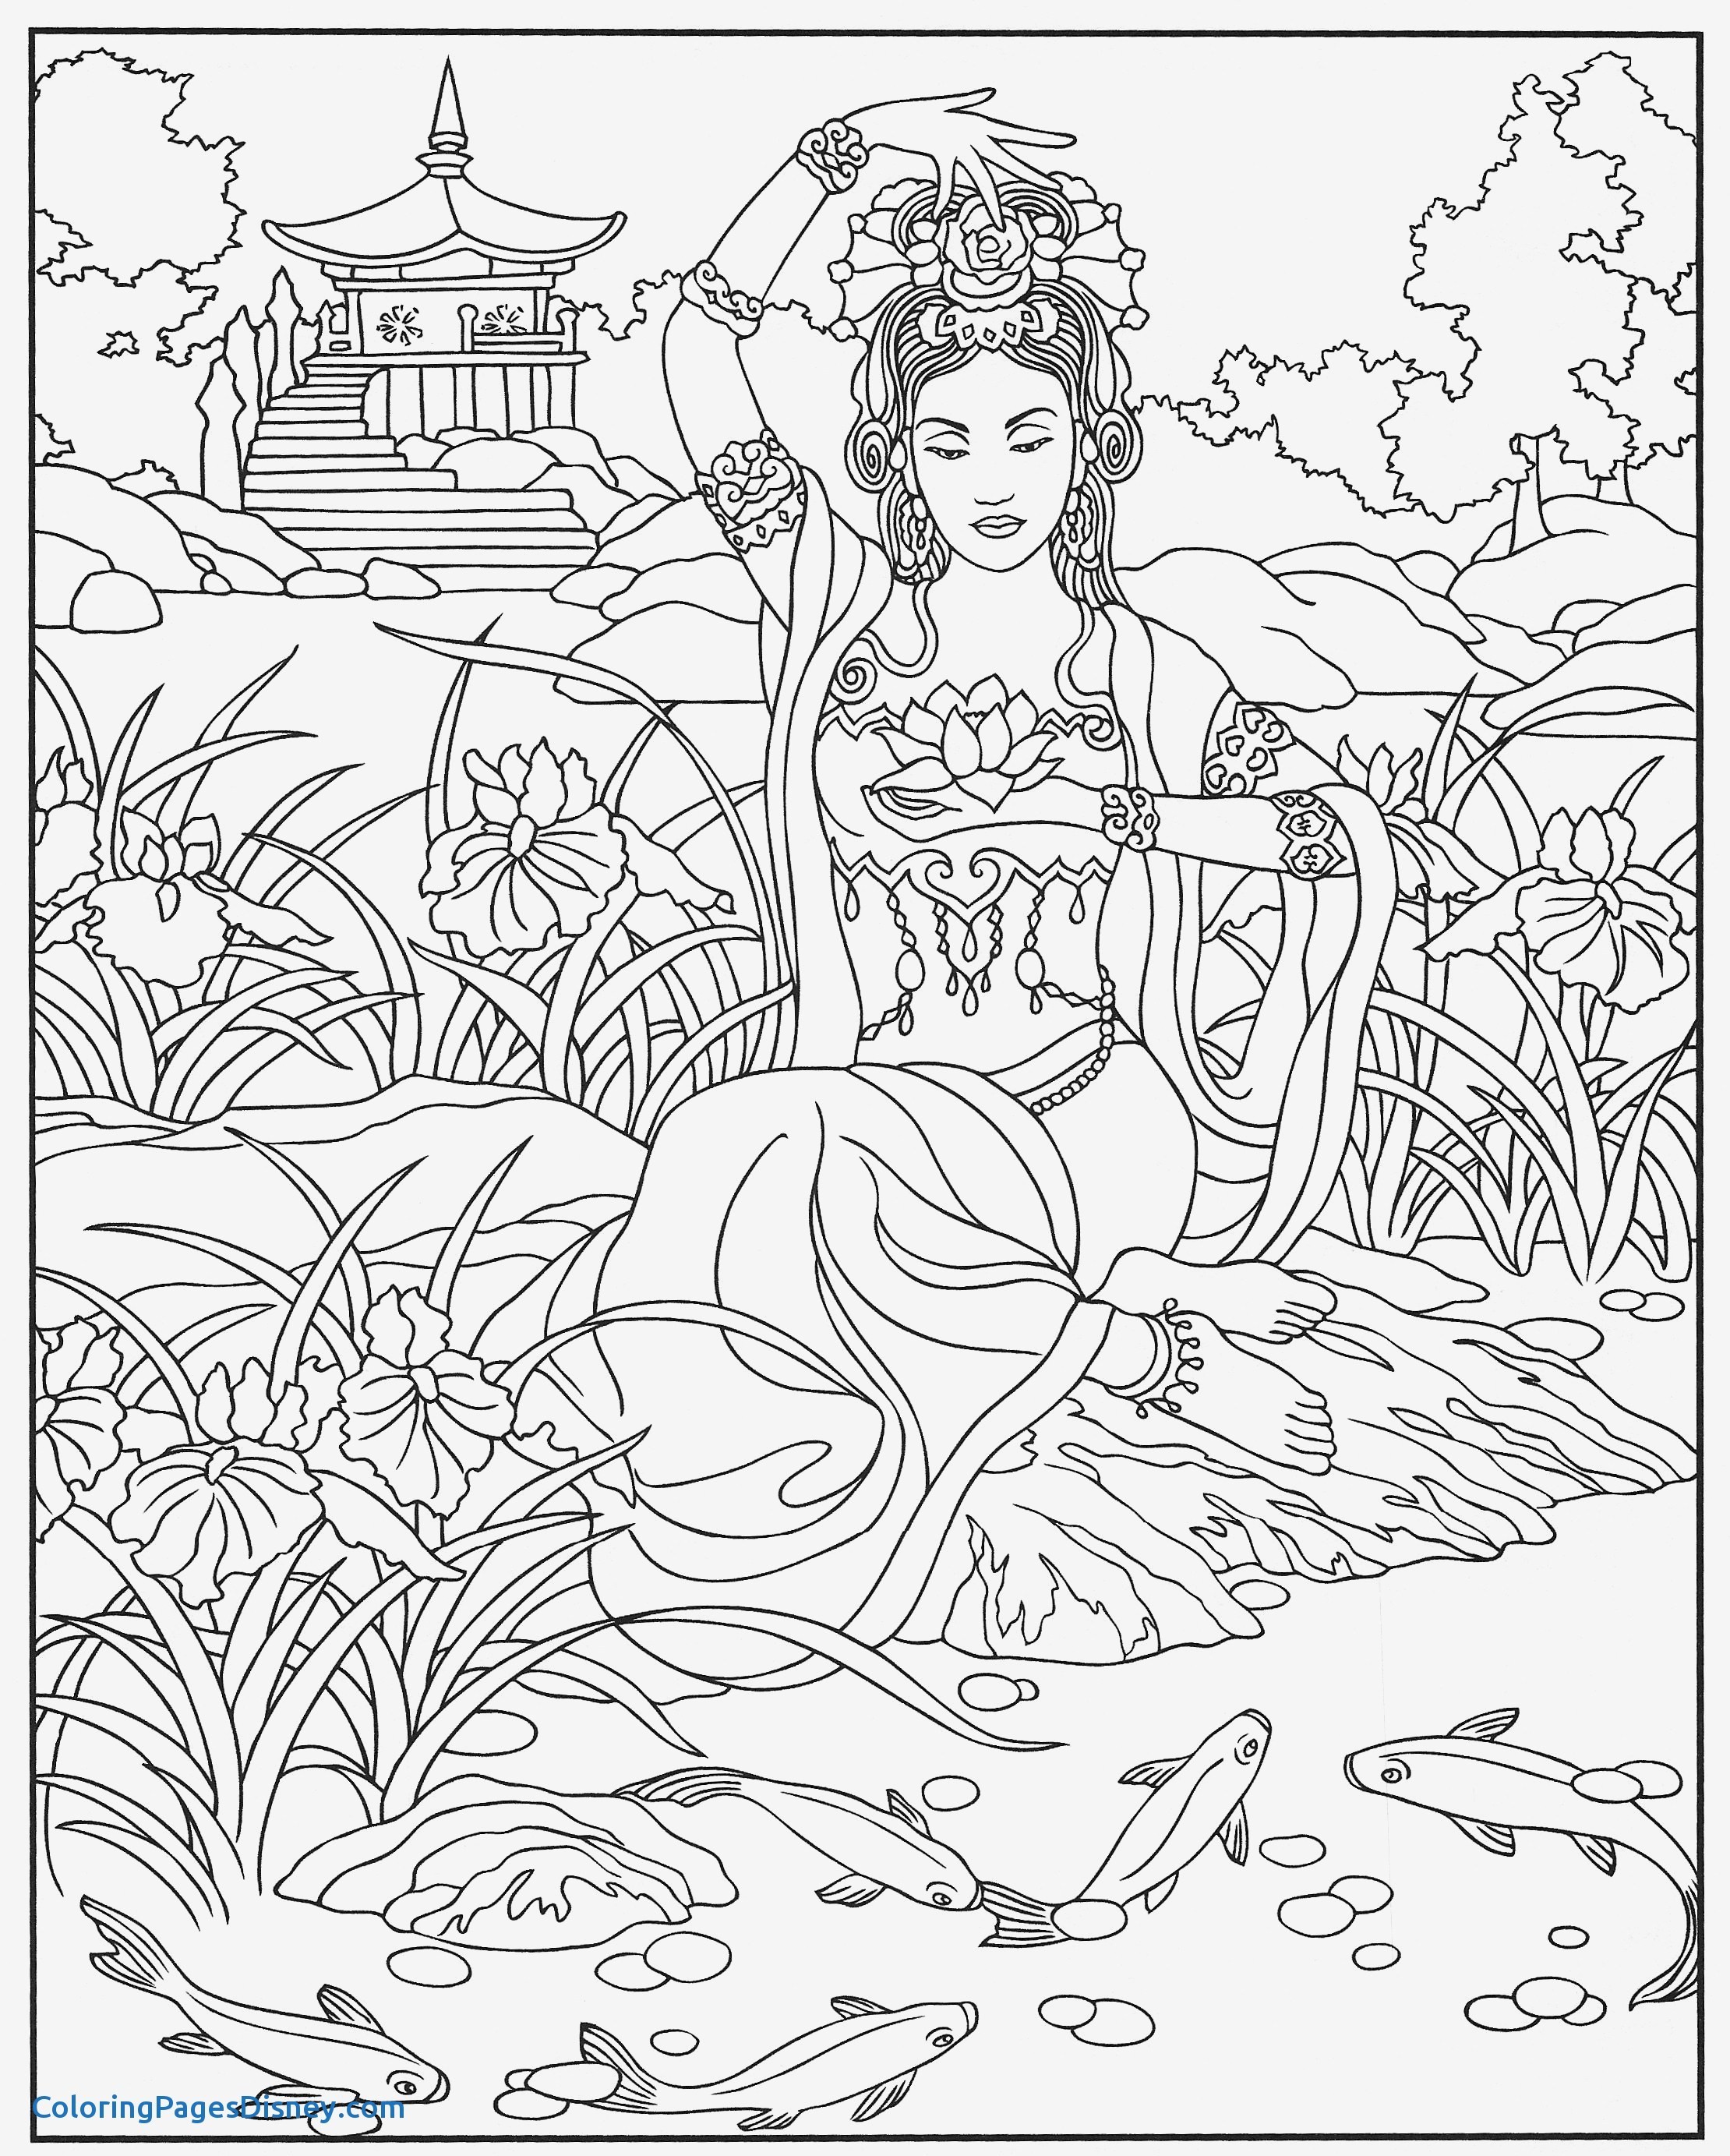 fashion coloring sheet fashion coloring pages new cool coloring page unique witch coloring pages new crayola pages 0d